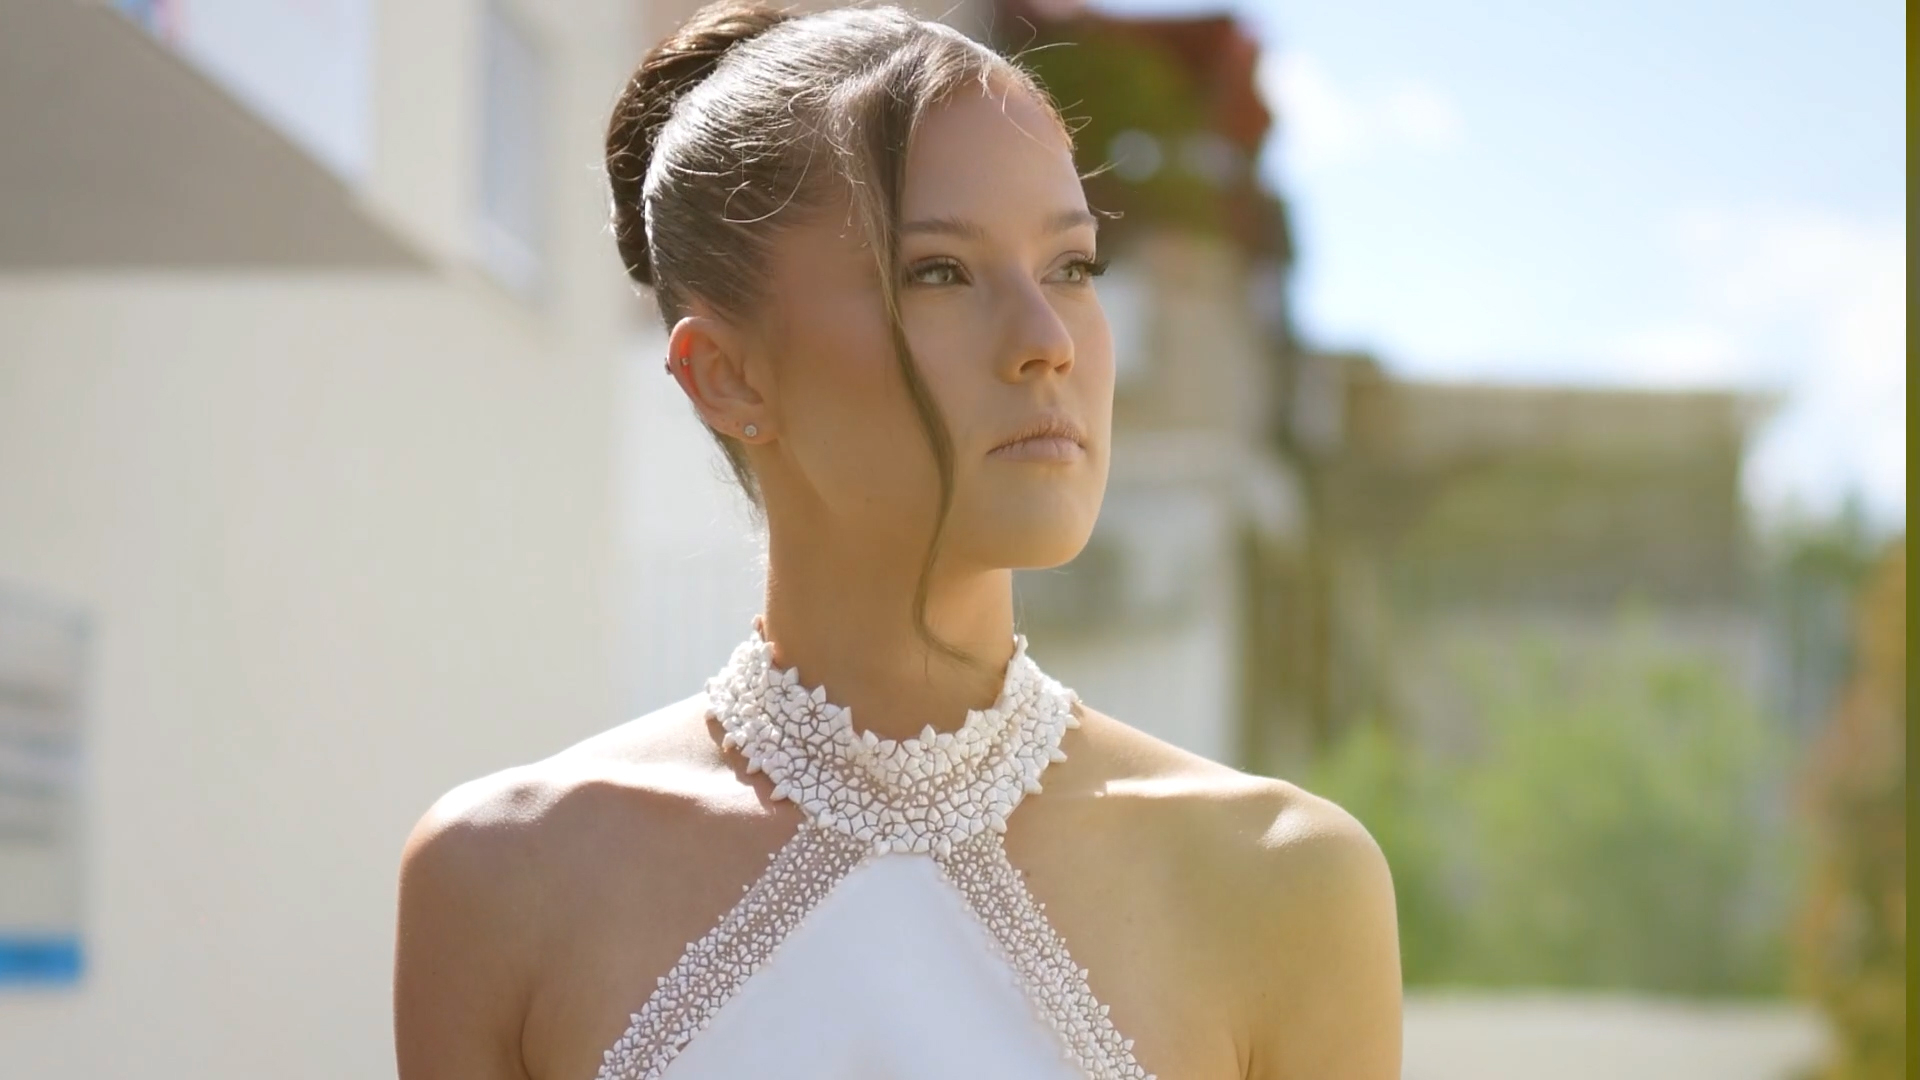 3D printing has allowed designer Ada Hefetz to digitally create complex geometrical shapes for her wedding dresses which she says would not otherwise be possible.